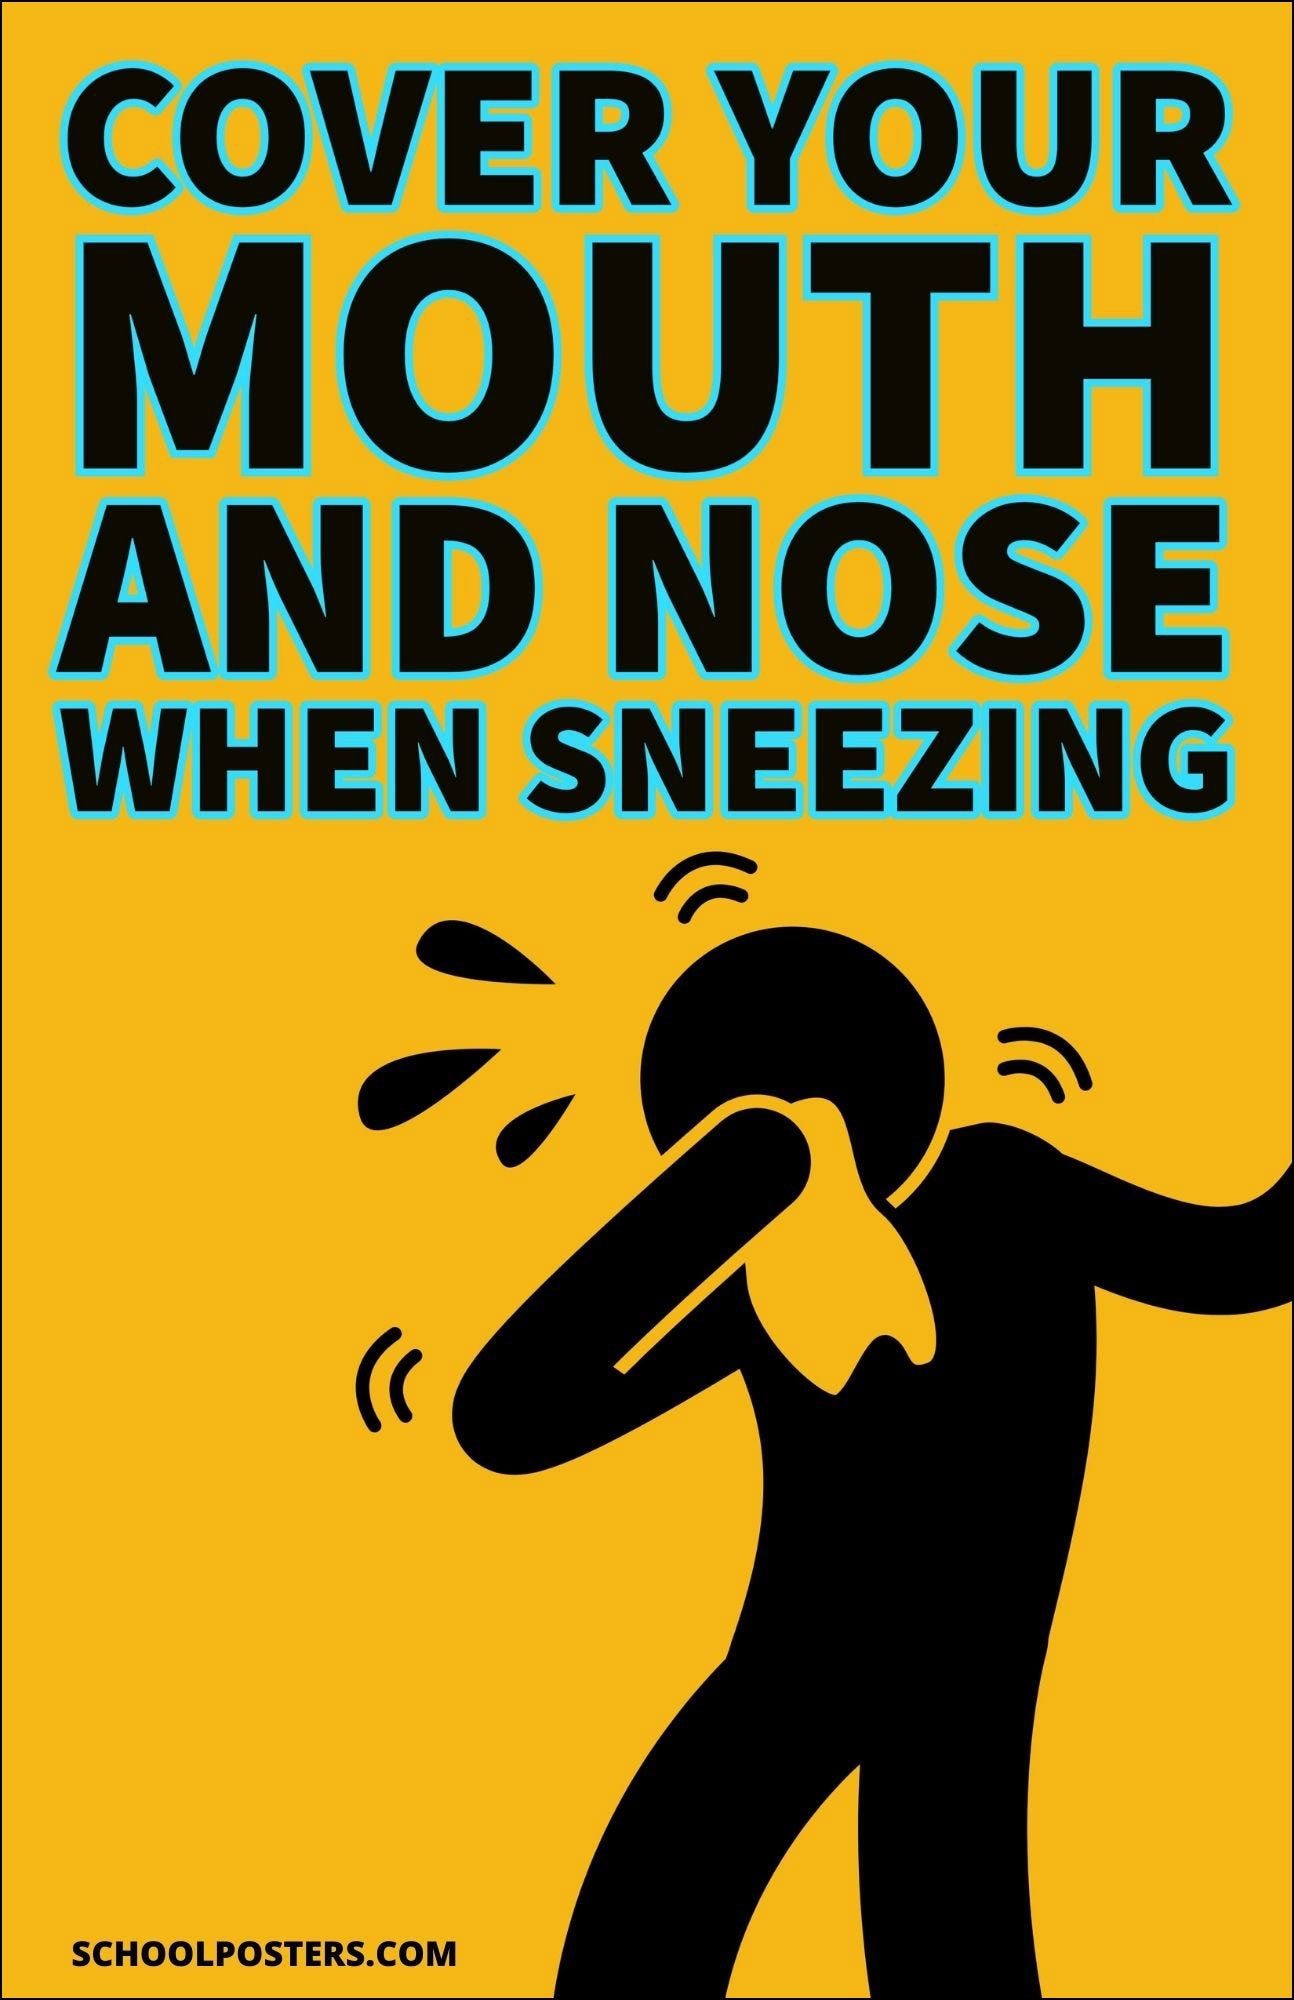 Cover Your Mouth And Nose When Sneezing Poster